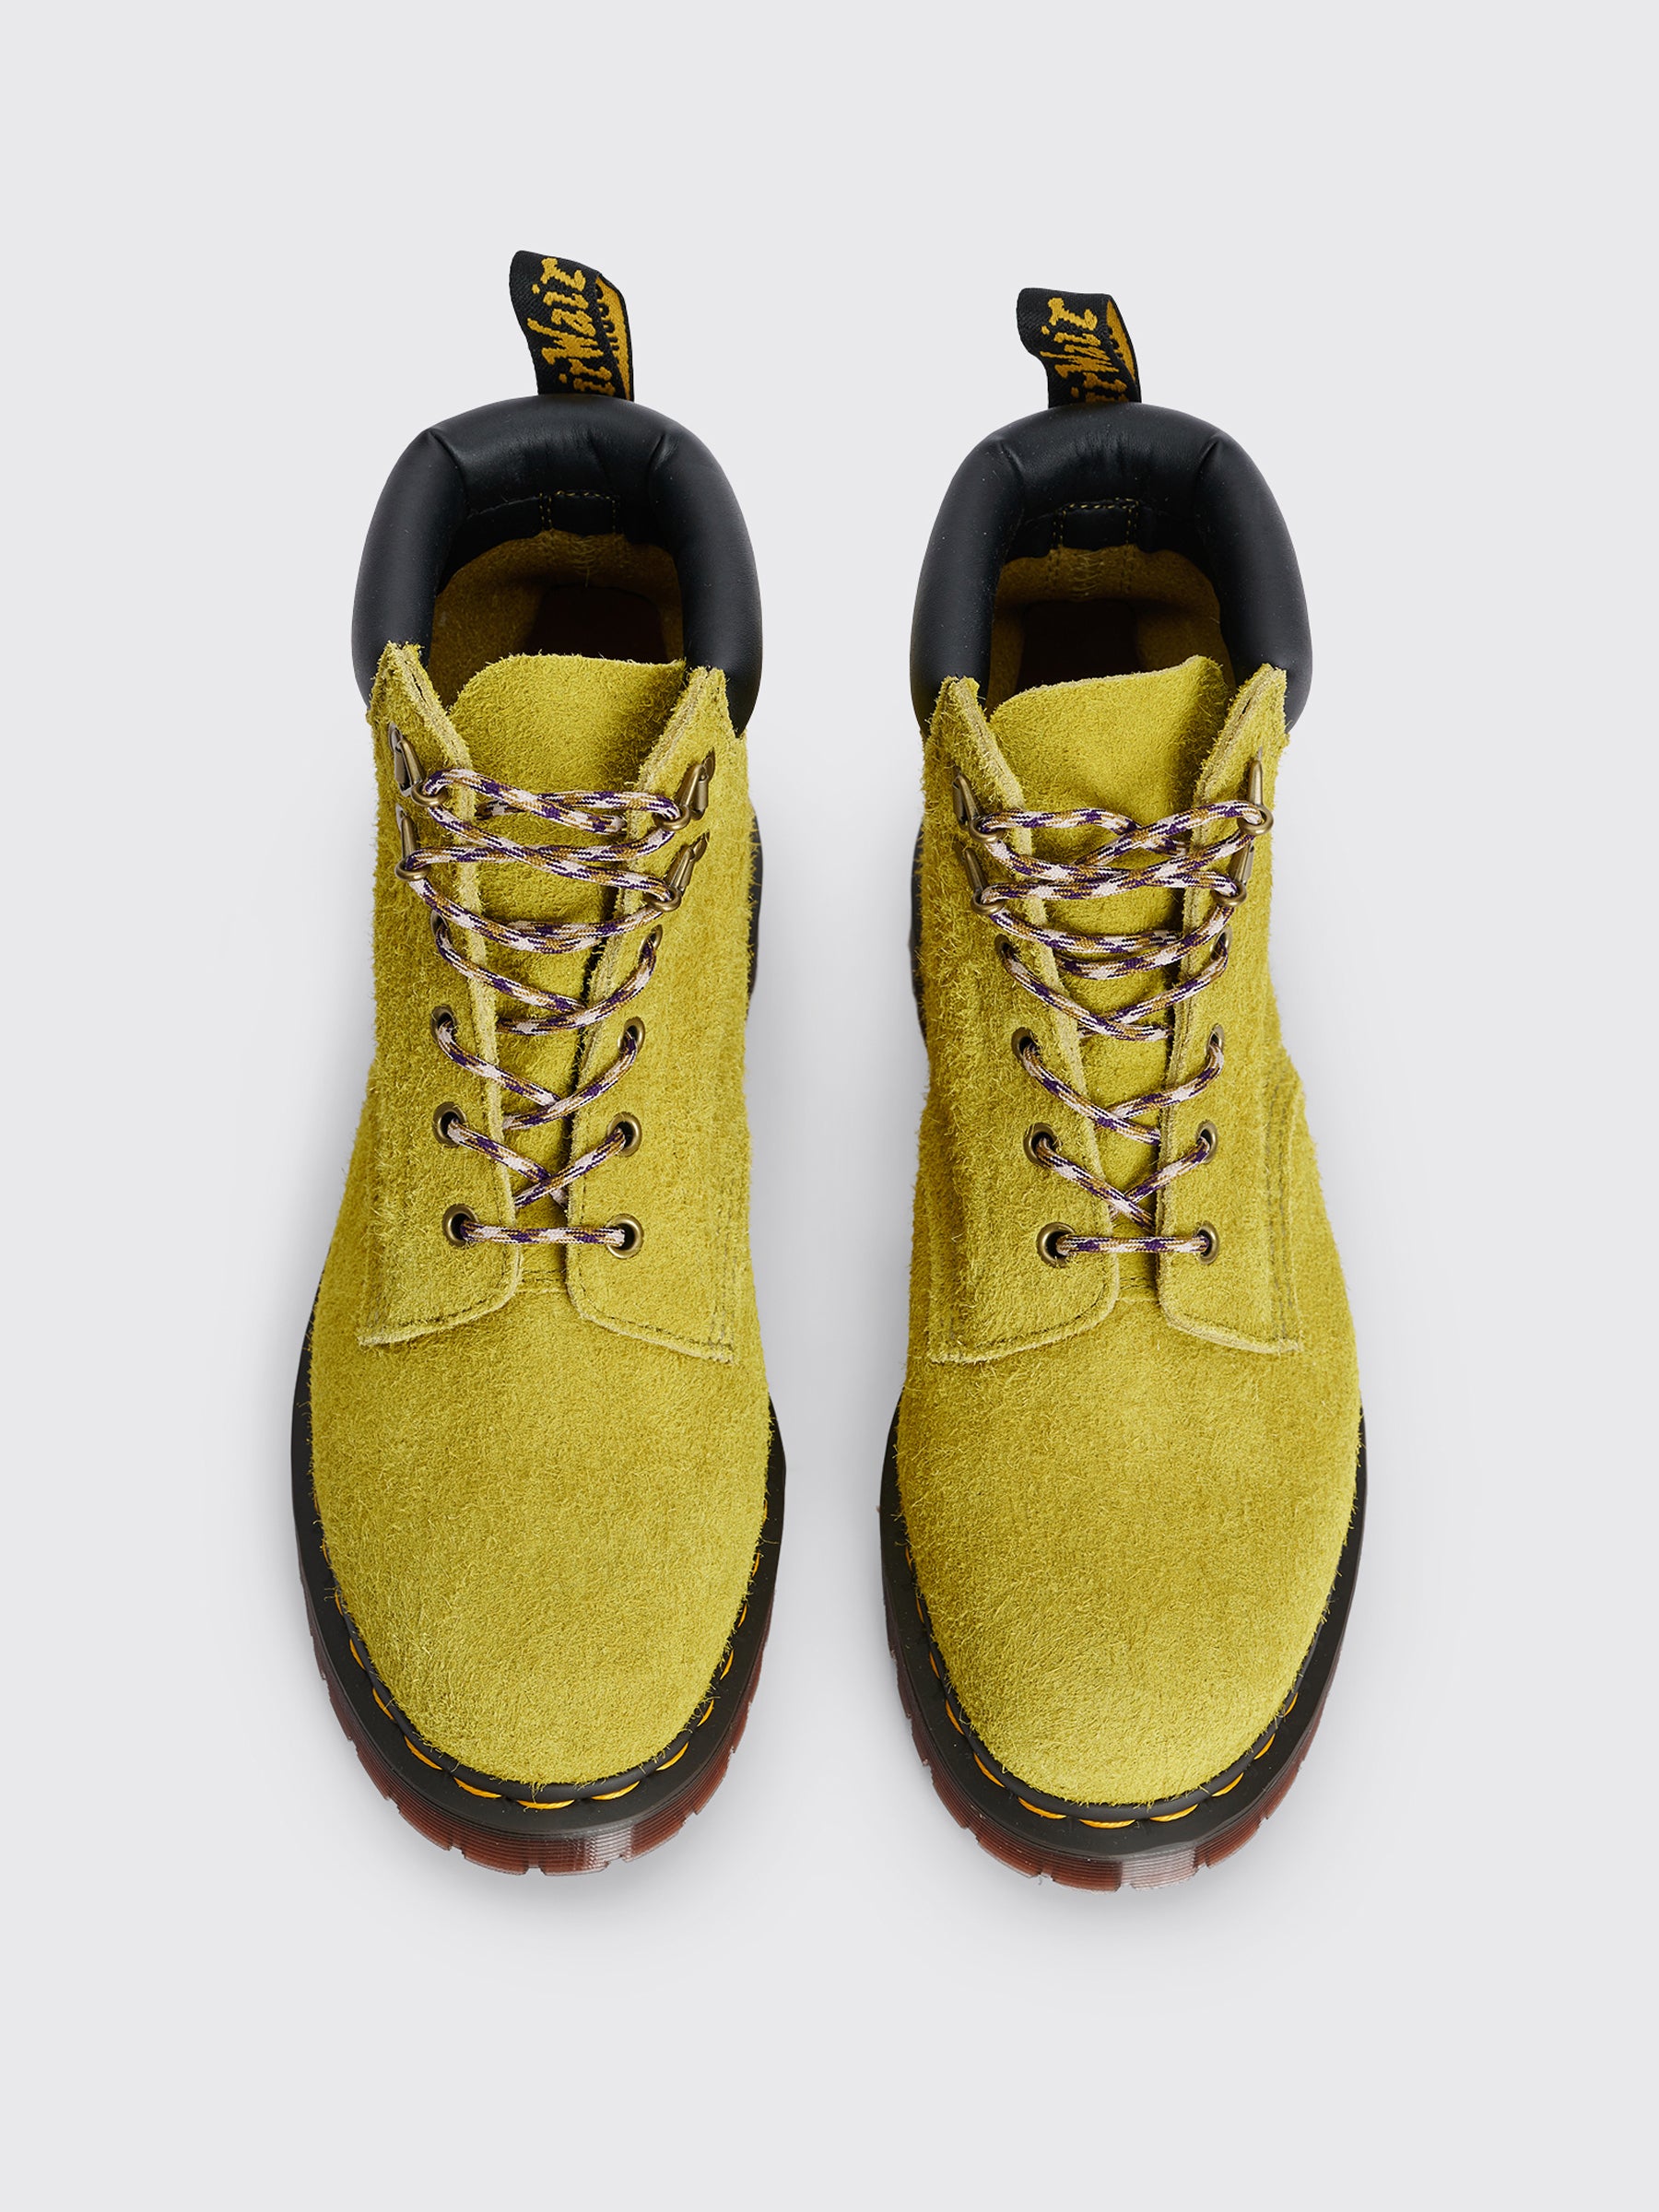 Dr. Martens 939 Boots Long Napped Suede Moss Green